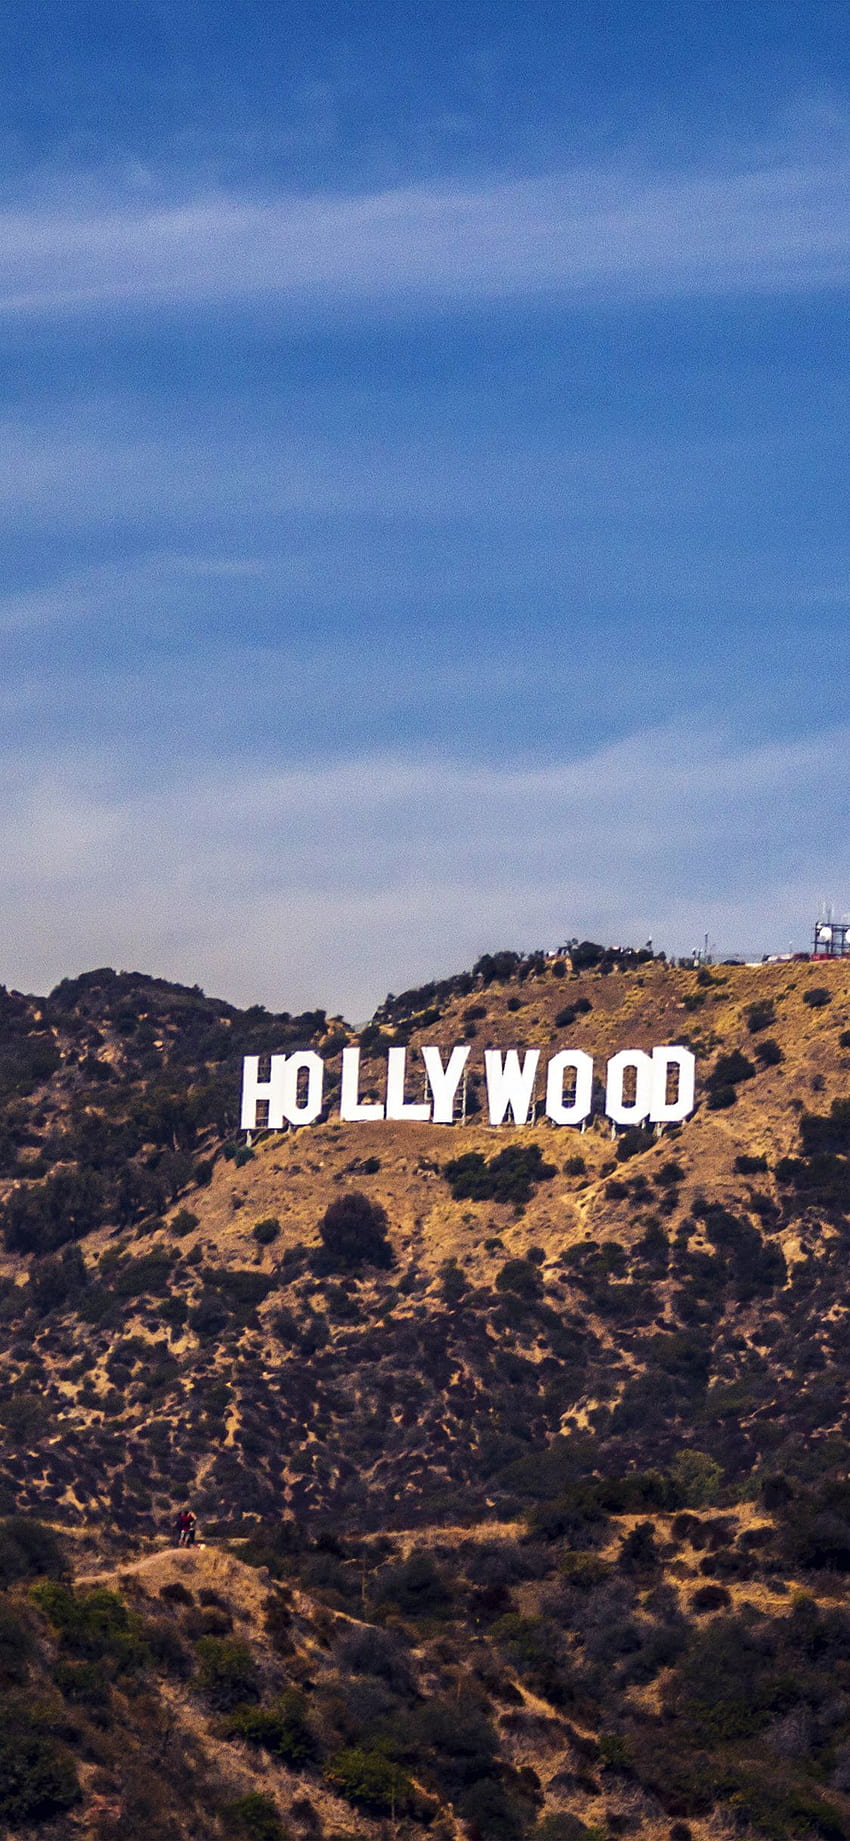 Hollywood sign on a hill in California - Los Angeles